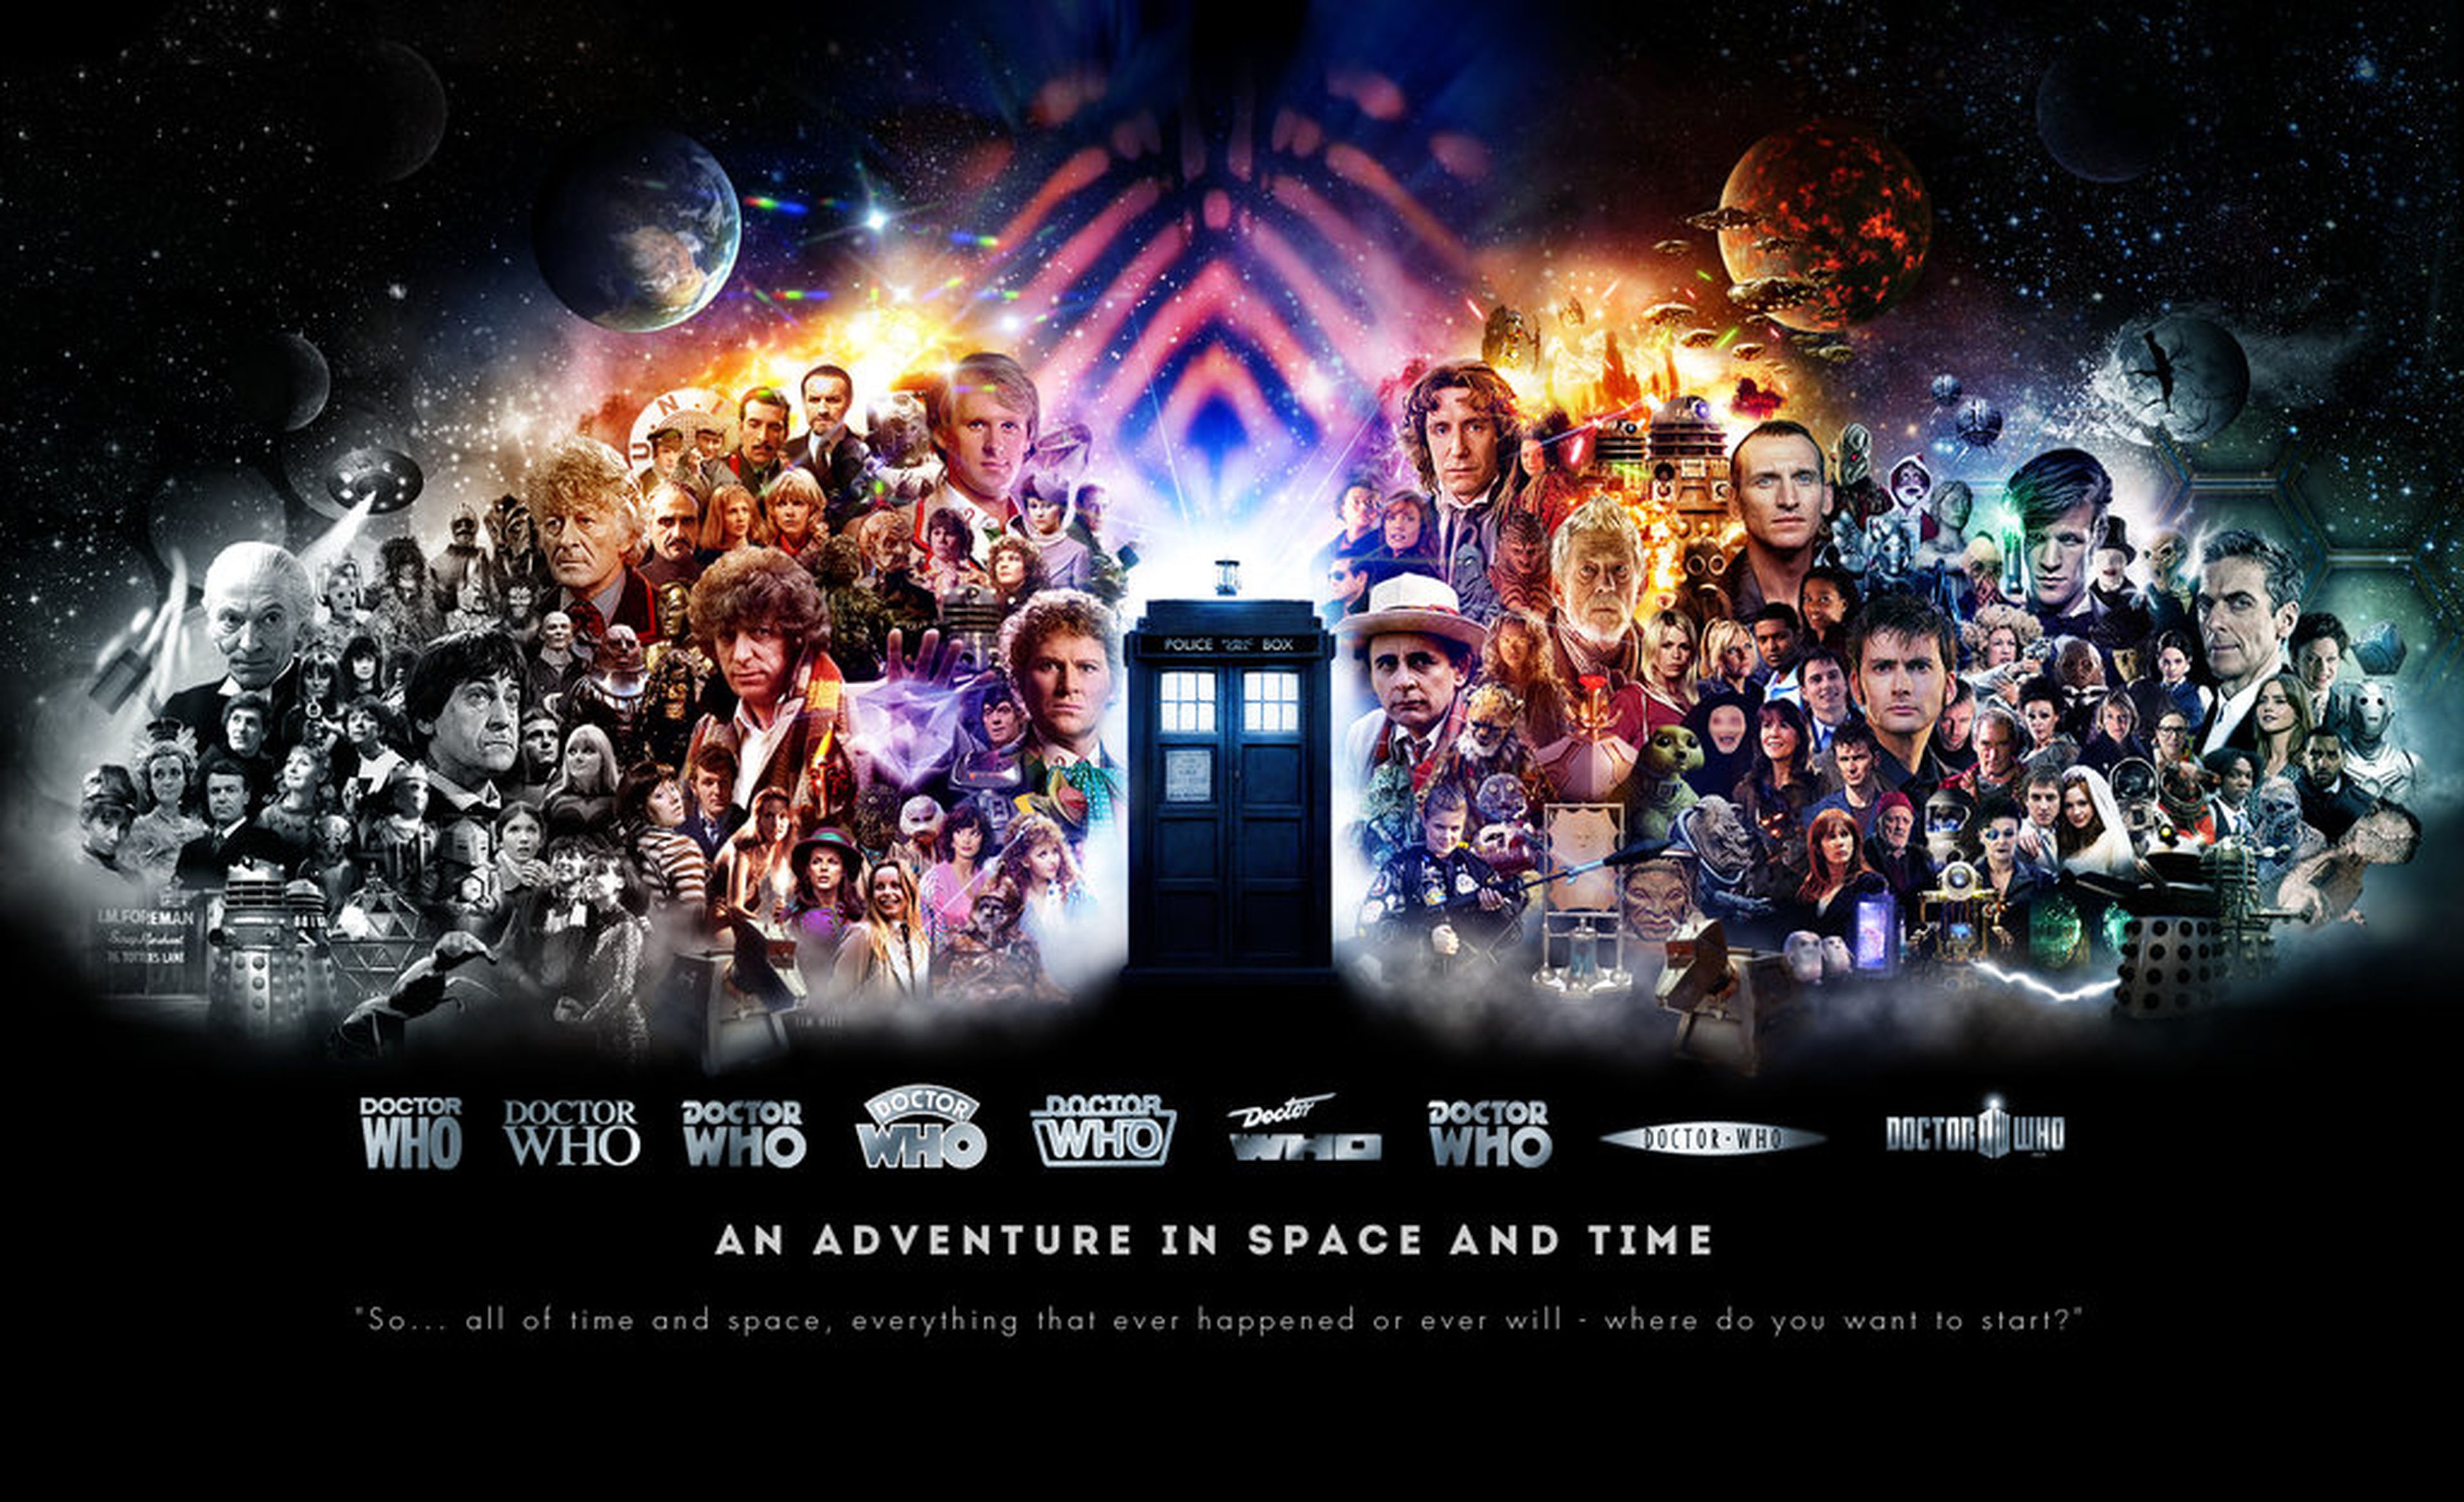 2. Doctor Who (1963 - ...)